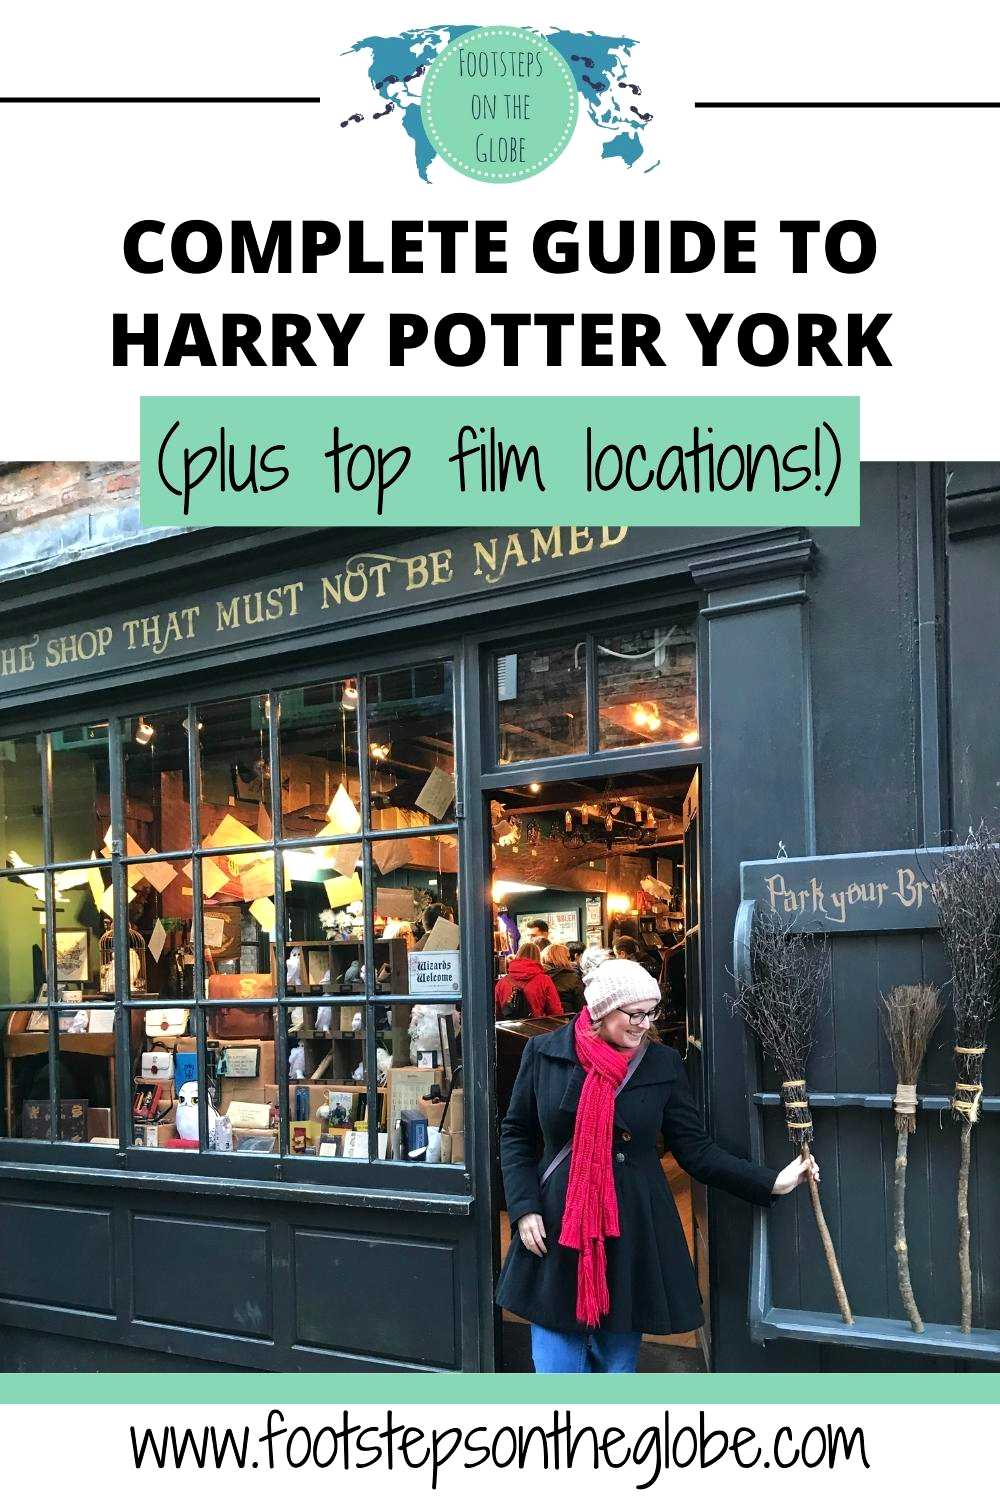 Pinterest image of Mel wearing a pink wooly hat, black coat and red scarf, grabbing a groom outside the "The Shop That Must Not Be Named" in York with the text: "Complete Guide to Harry Potter York (plus top film locations!)"